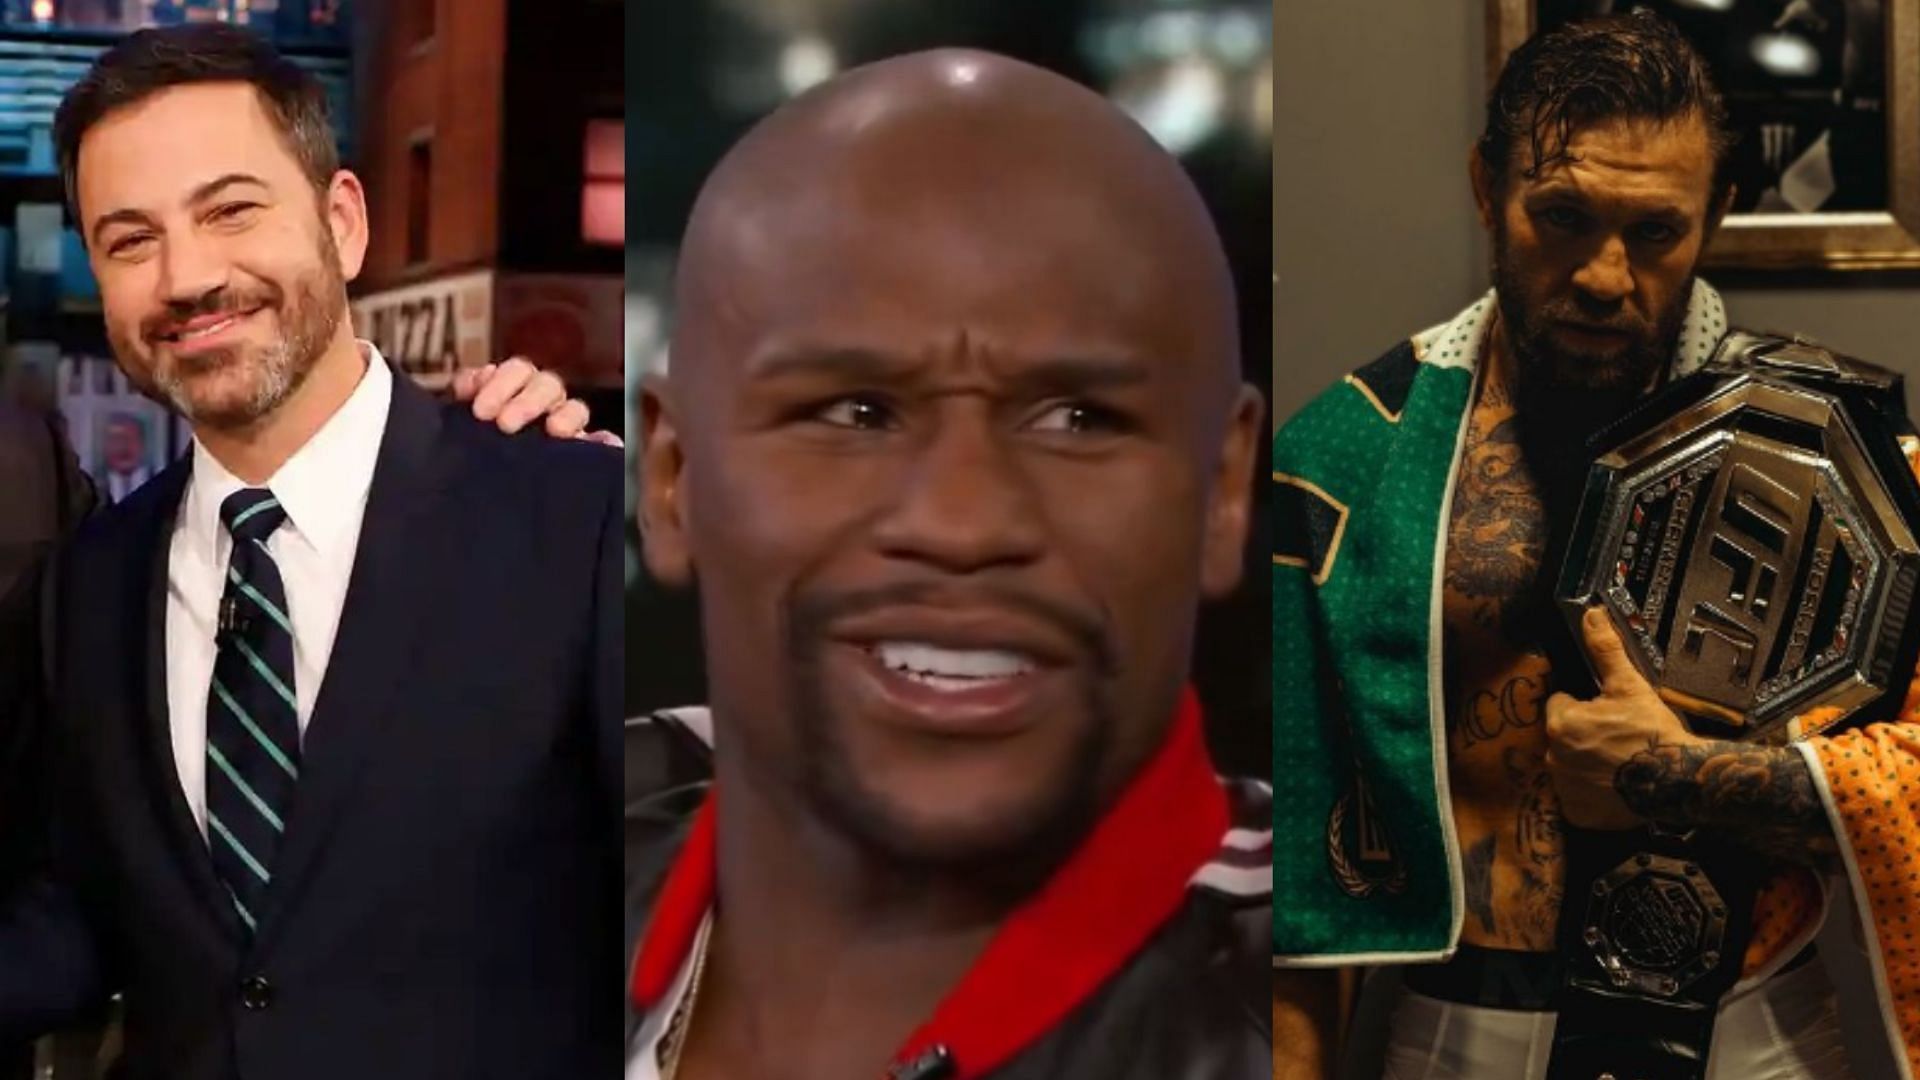 When Jimmy Kimmel (left), asked Floyd Mayweather (centre) a NSFW question regarding Conor McGregor (right) [Images courtesy of Jimmy Kimmel Live on YouTube &amp; @thenotoriousmma on Instagram]